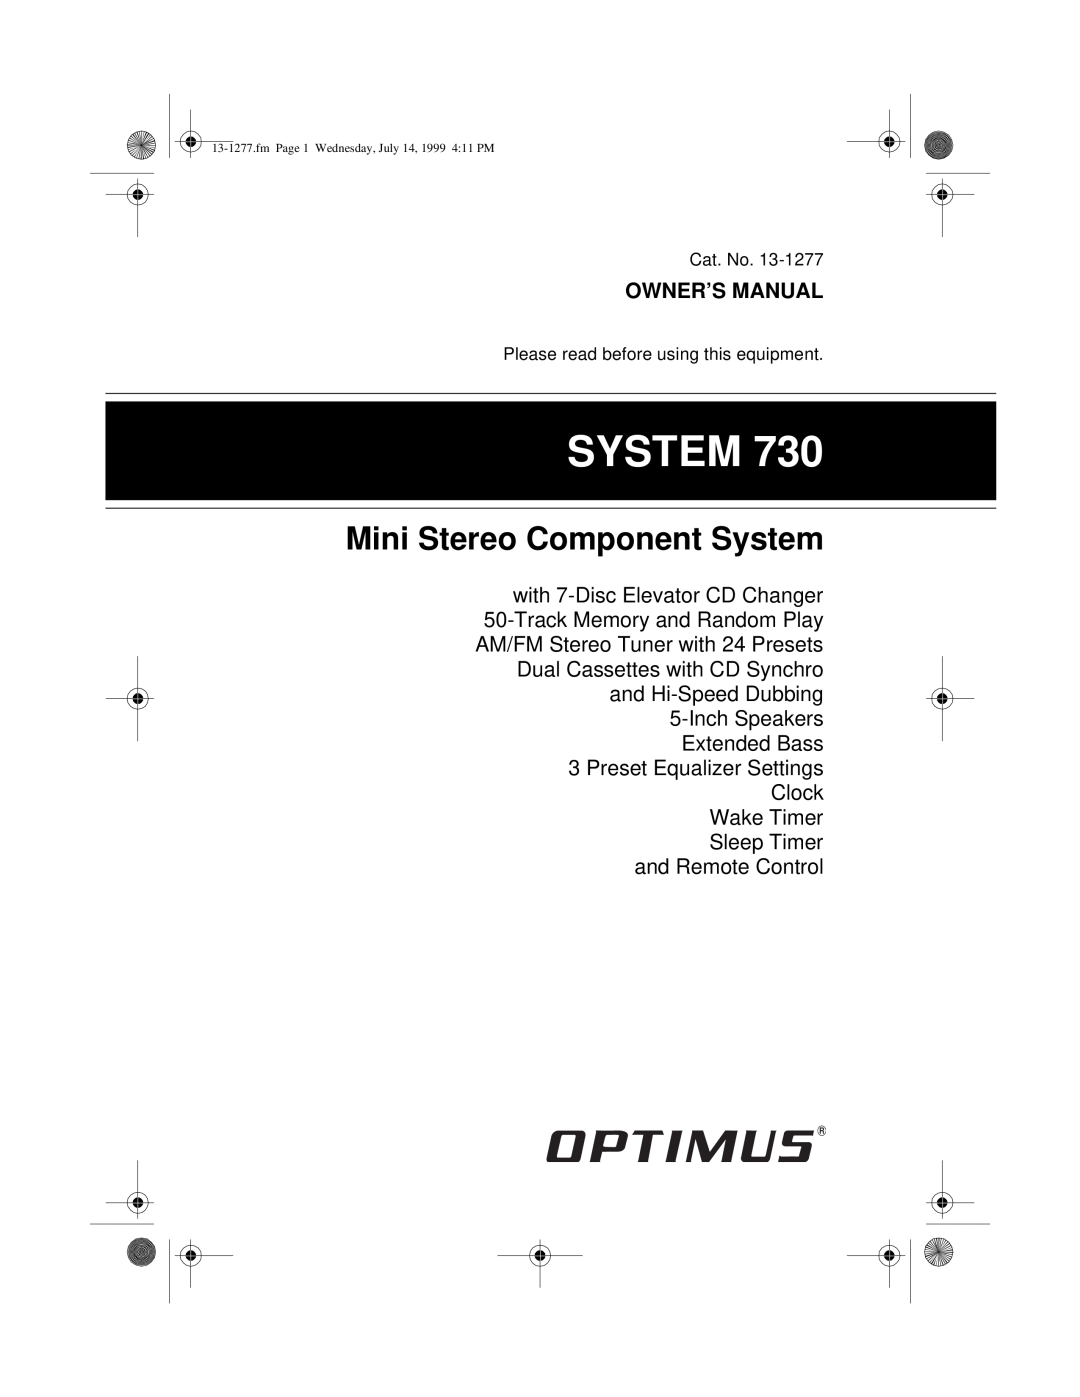 Optimus SYSTEM 730 owner manual Mini Stereo Component System, Preset Equalizer Settings Clock Wake Timer 